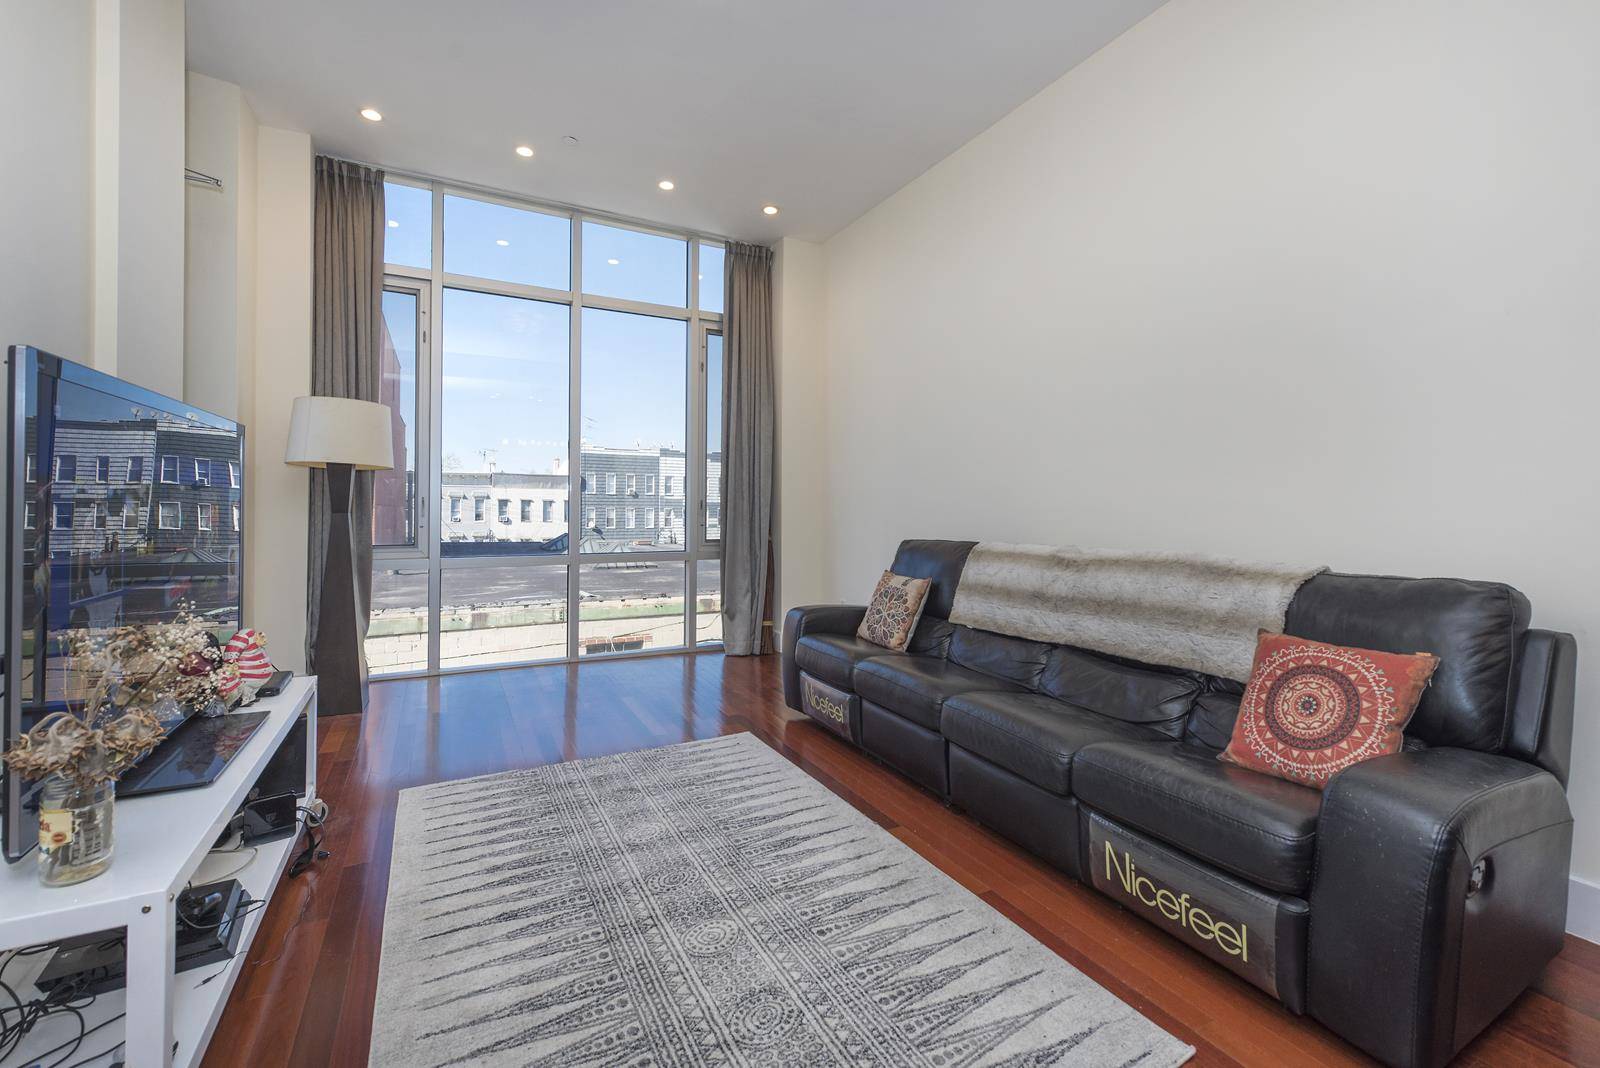 Indulge in boutique luxury in this charming and spacious one bedroom condominium.